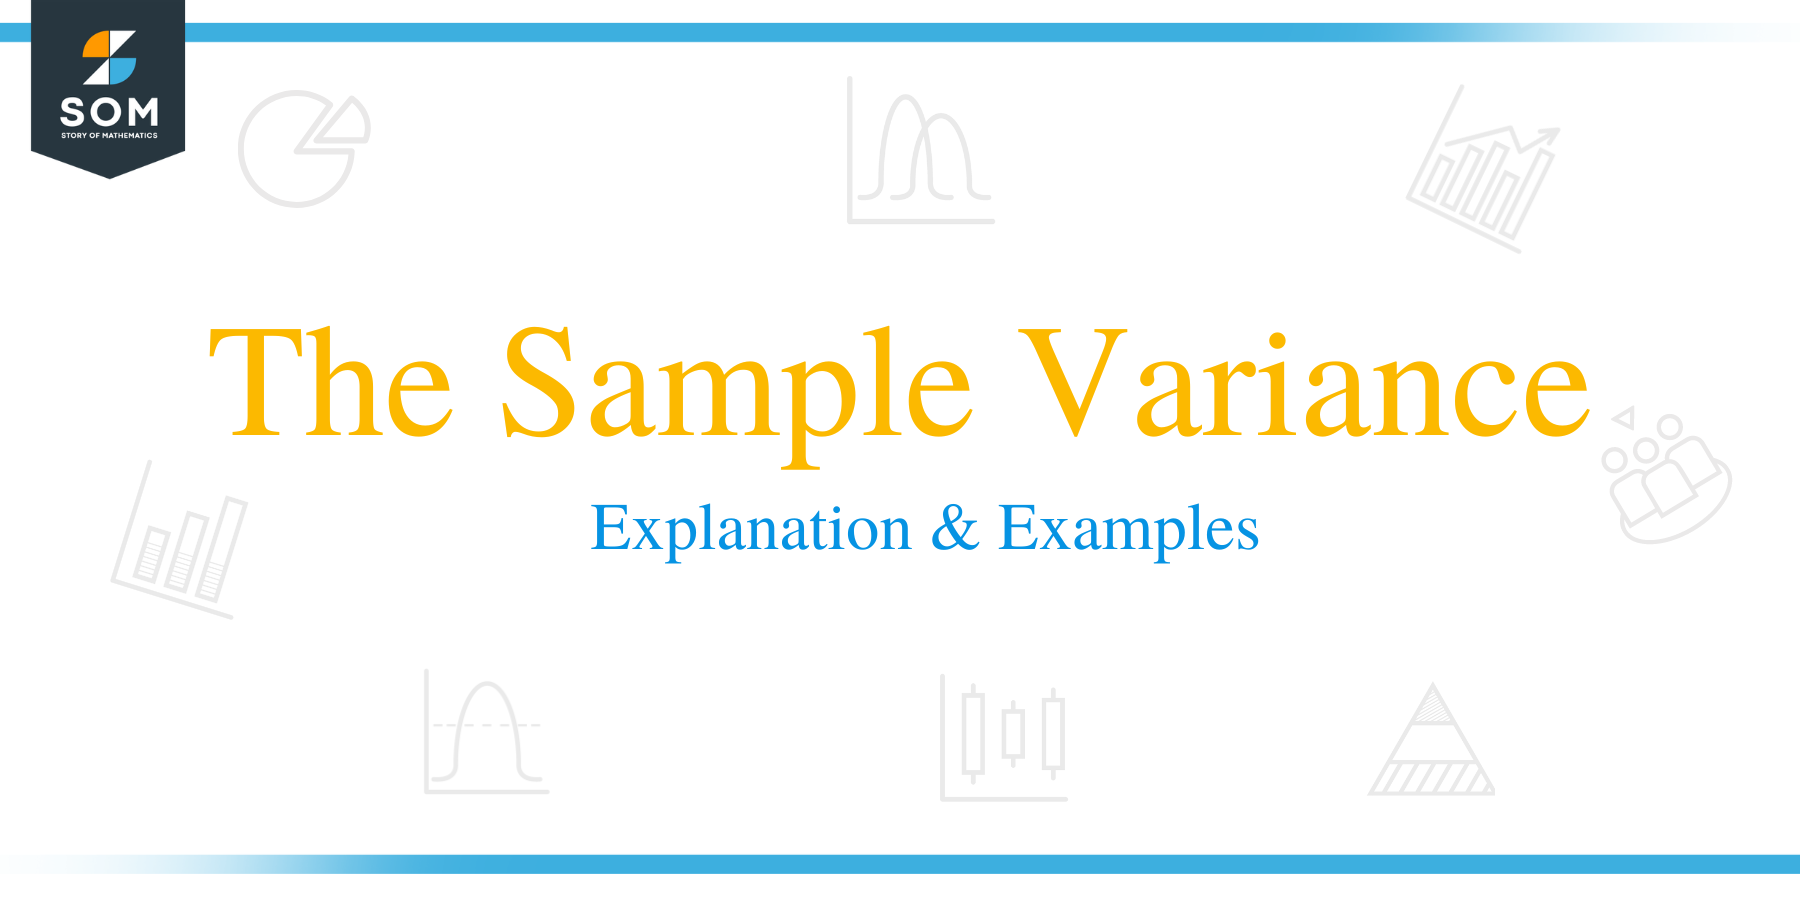 The Sample Variance